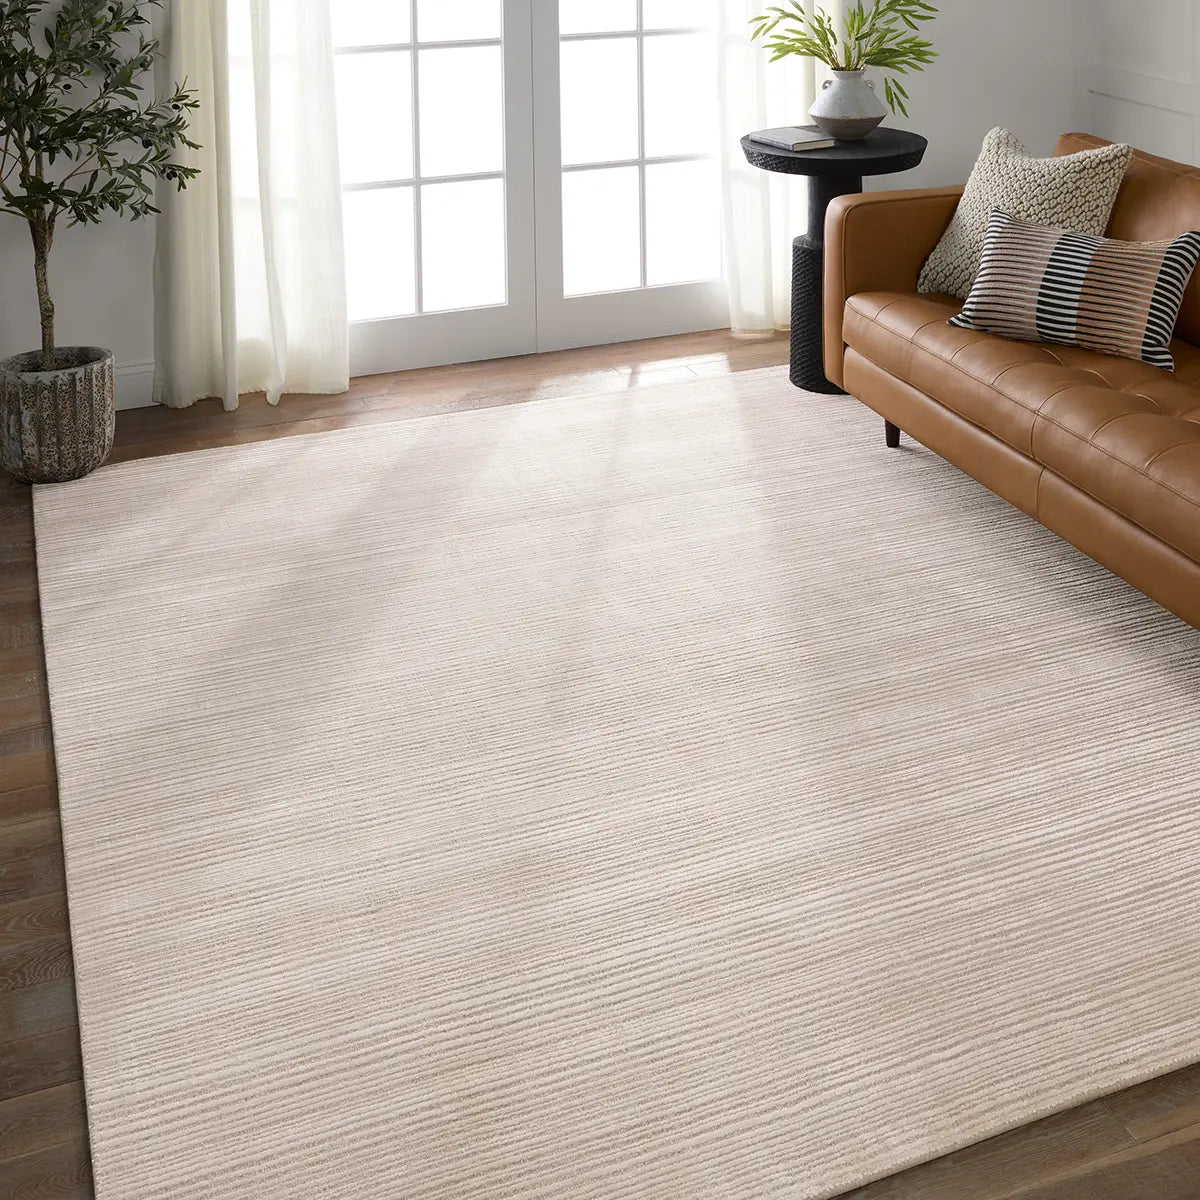 Second Sunset SST09 Ivory and Cream Rug - Rug & Home